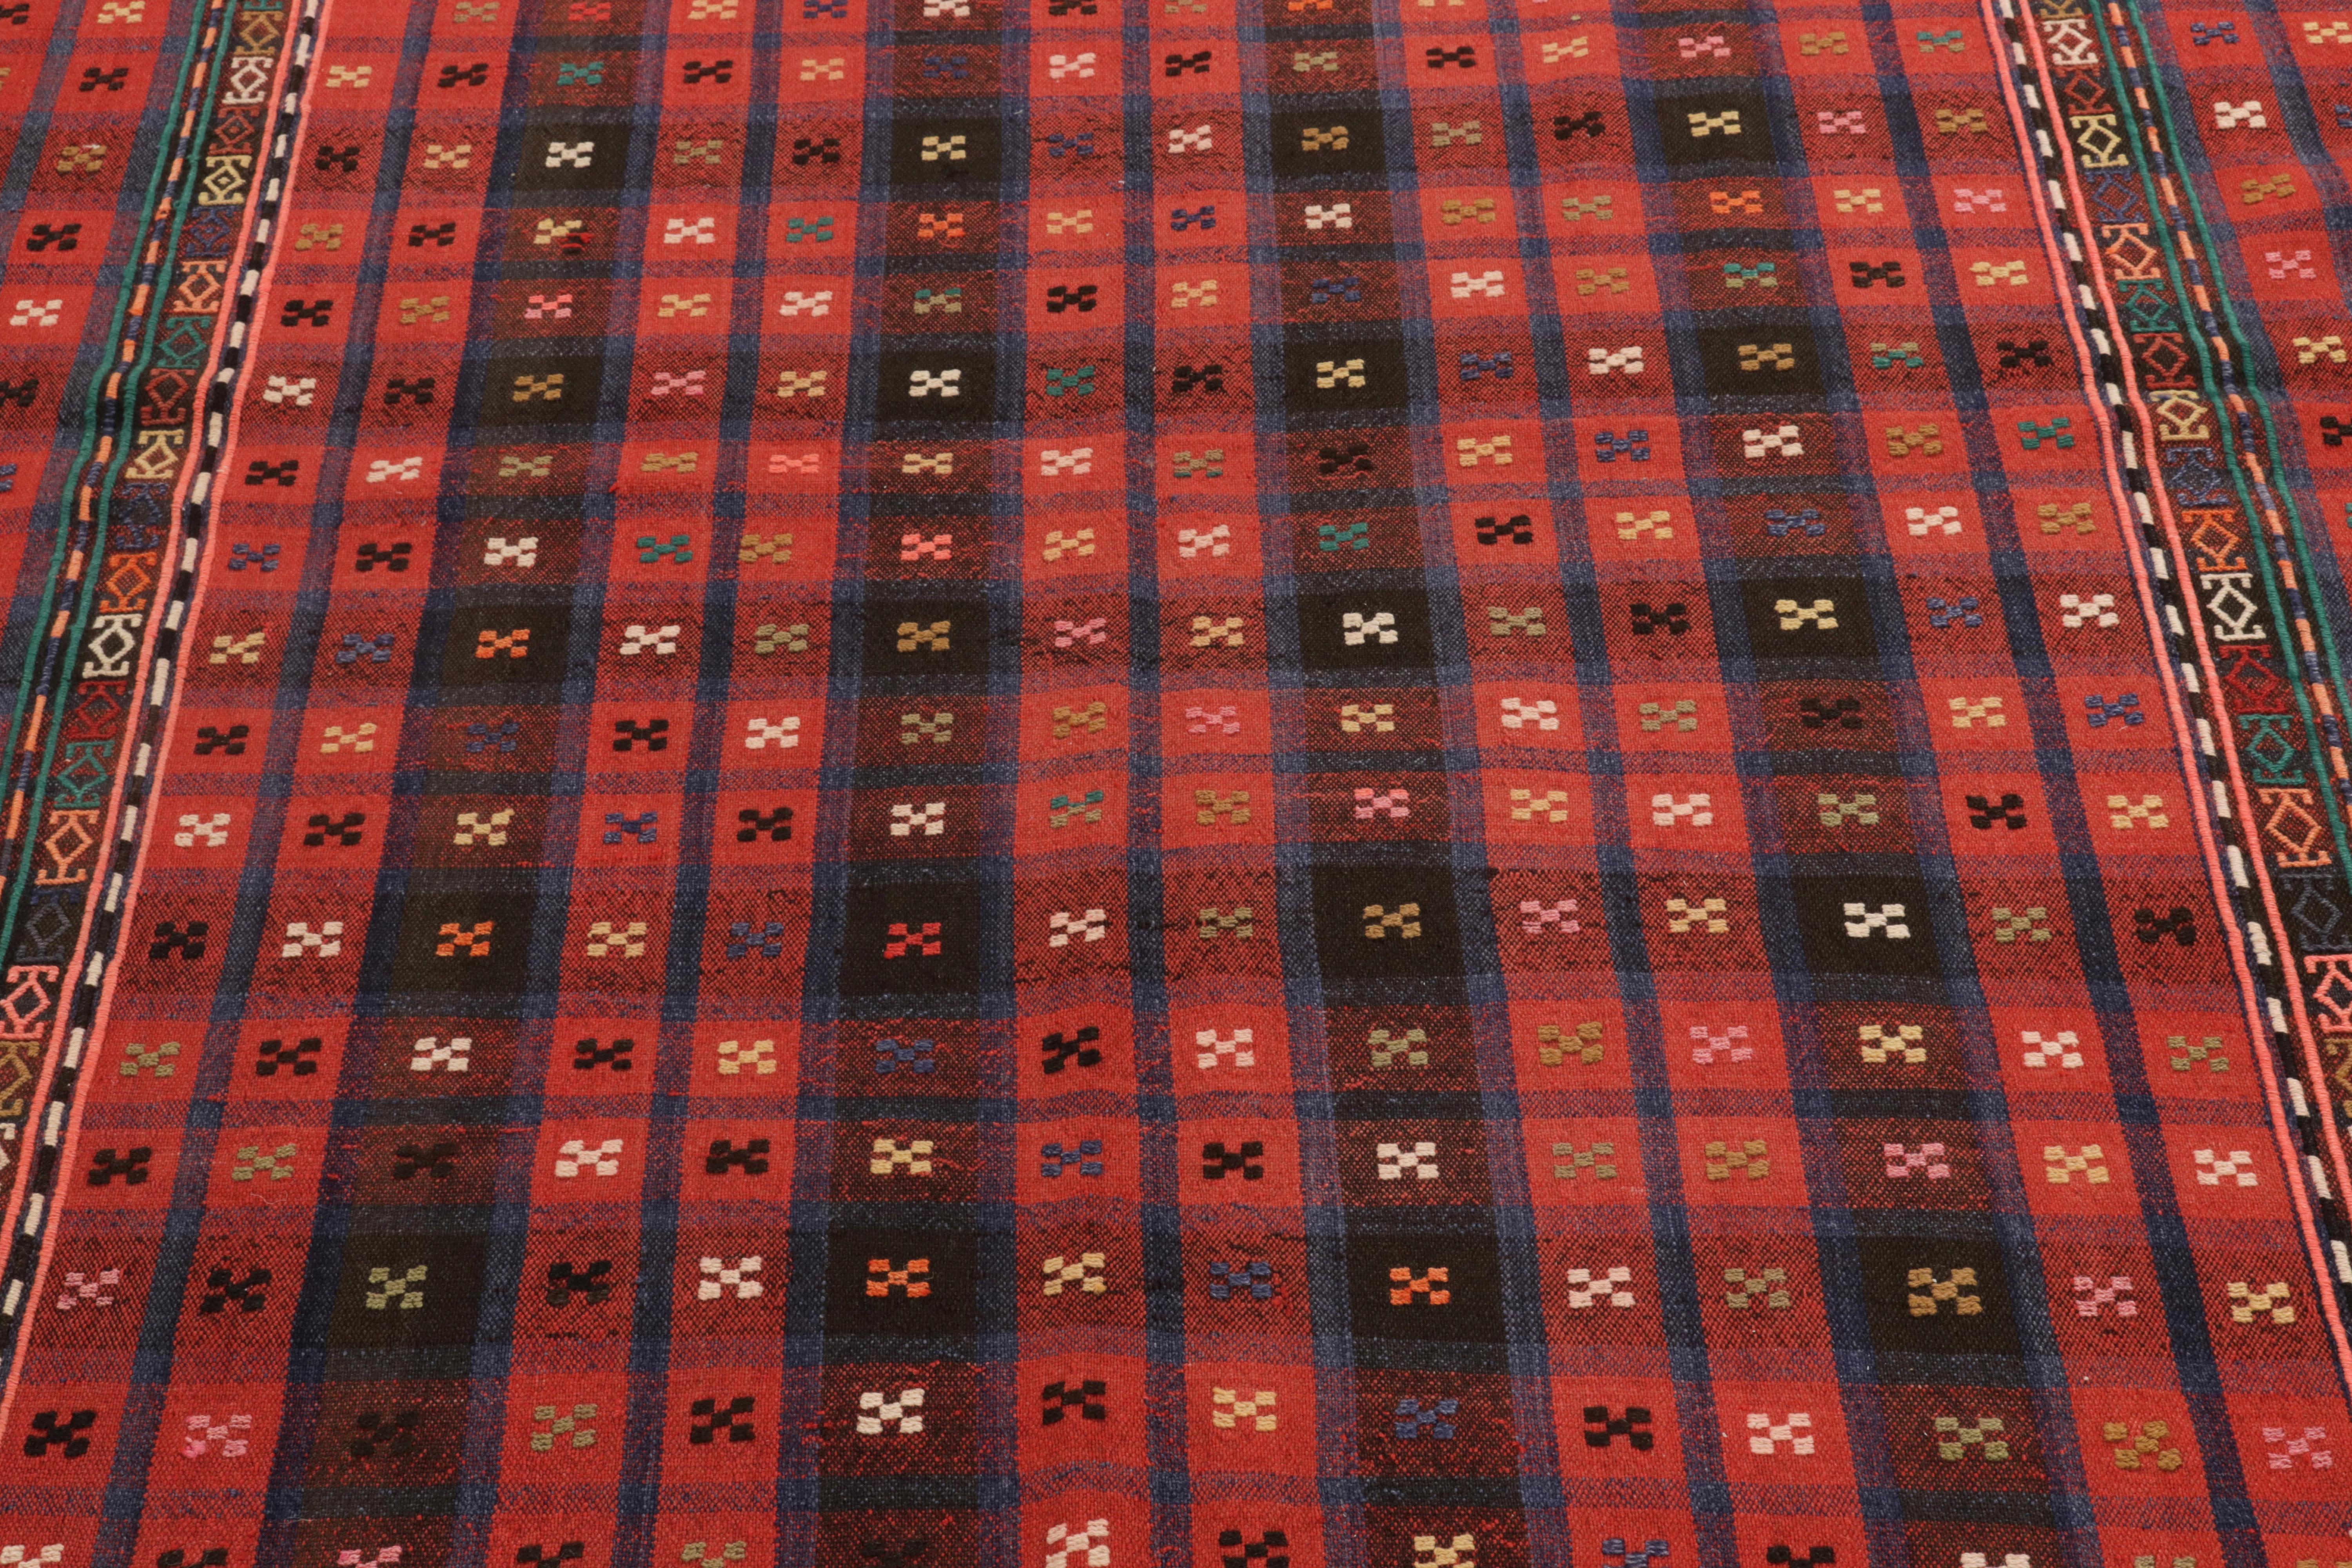 Handwoven in wool from Russia originating between 1880-1890, a 6x9 antique Verneh kilim enjoying a union of tasteful geometry & impeccable artistic interpretations. The selection of classic red & black tones in juxtaposition with blue, peach & green